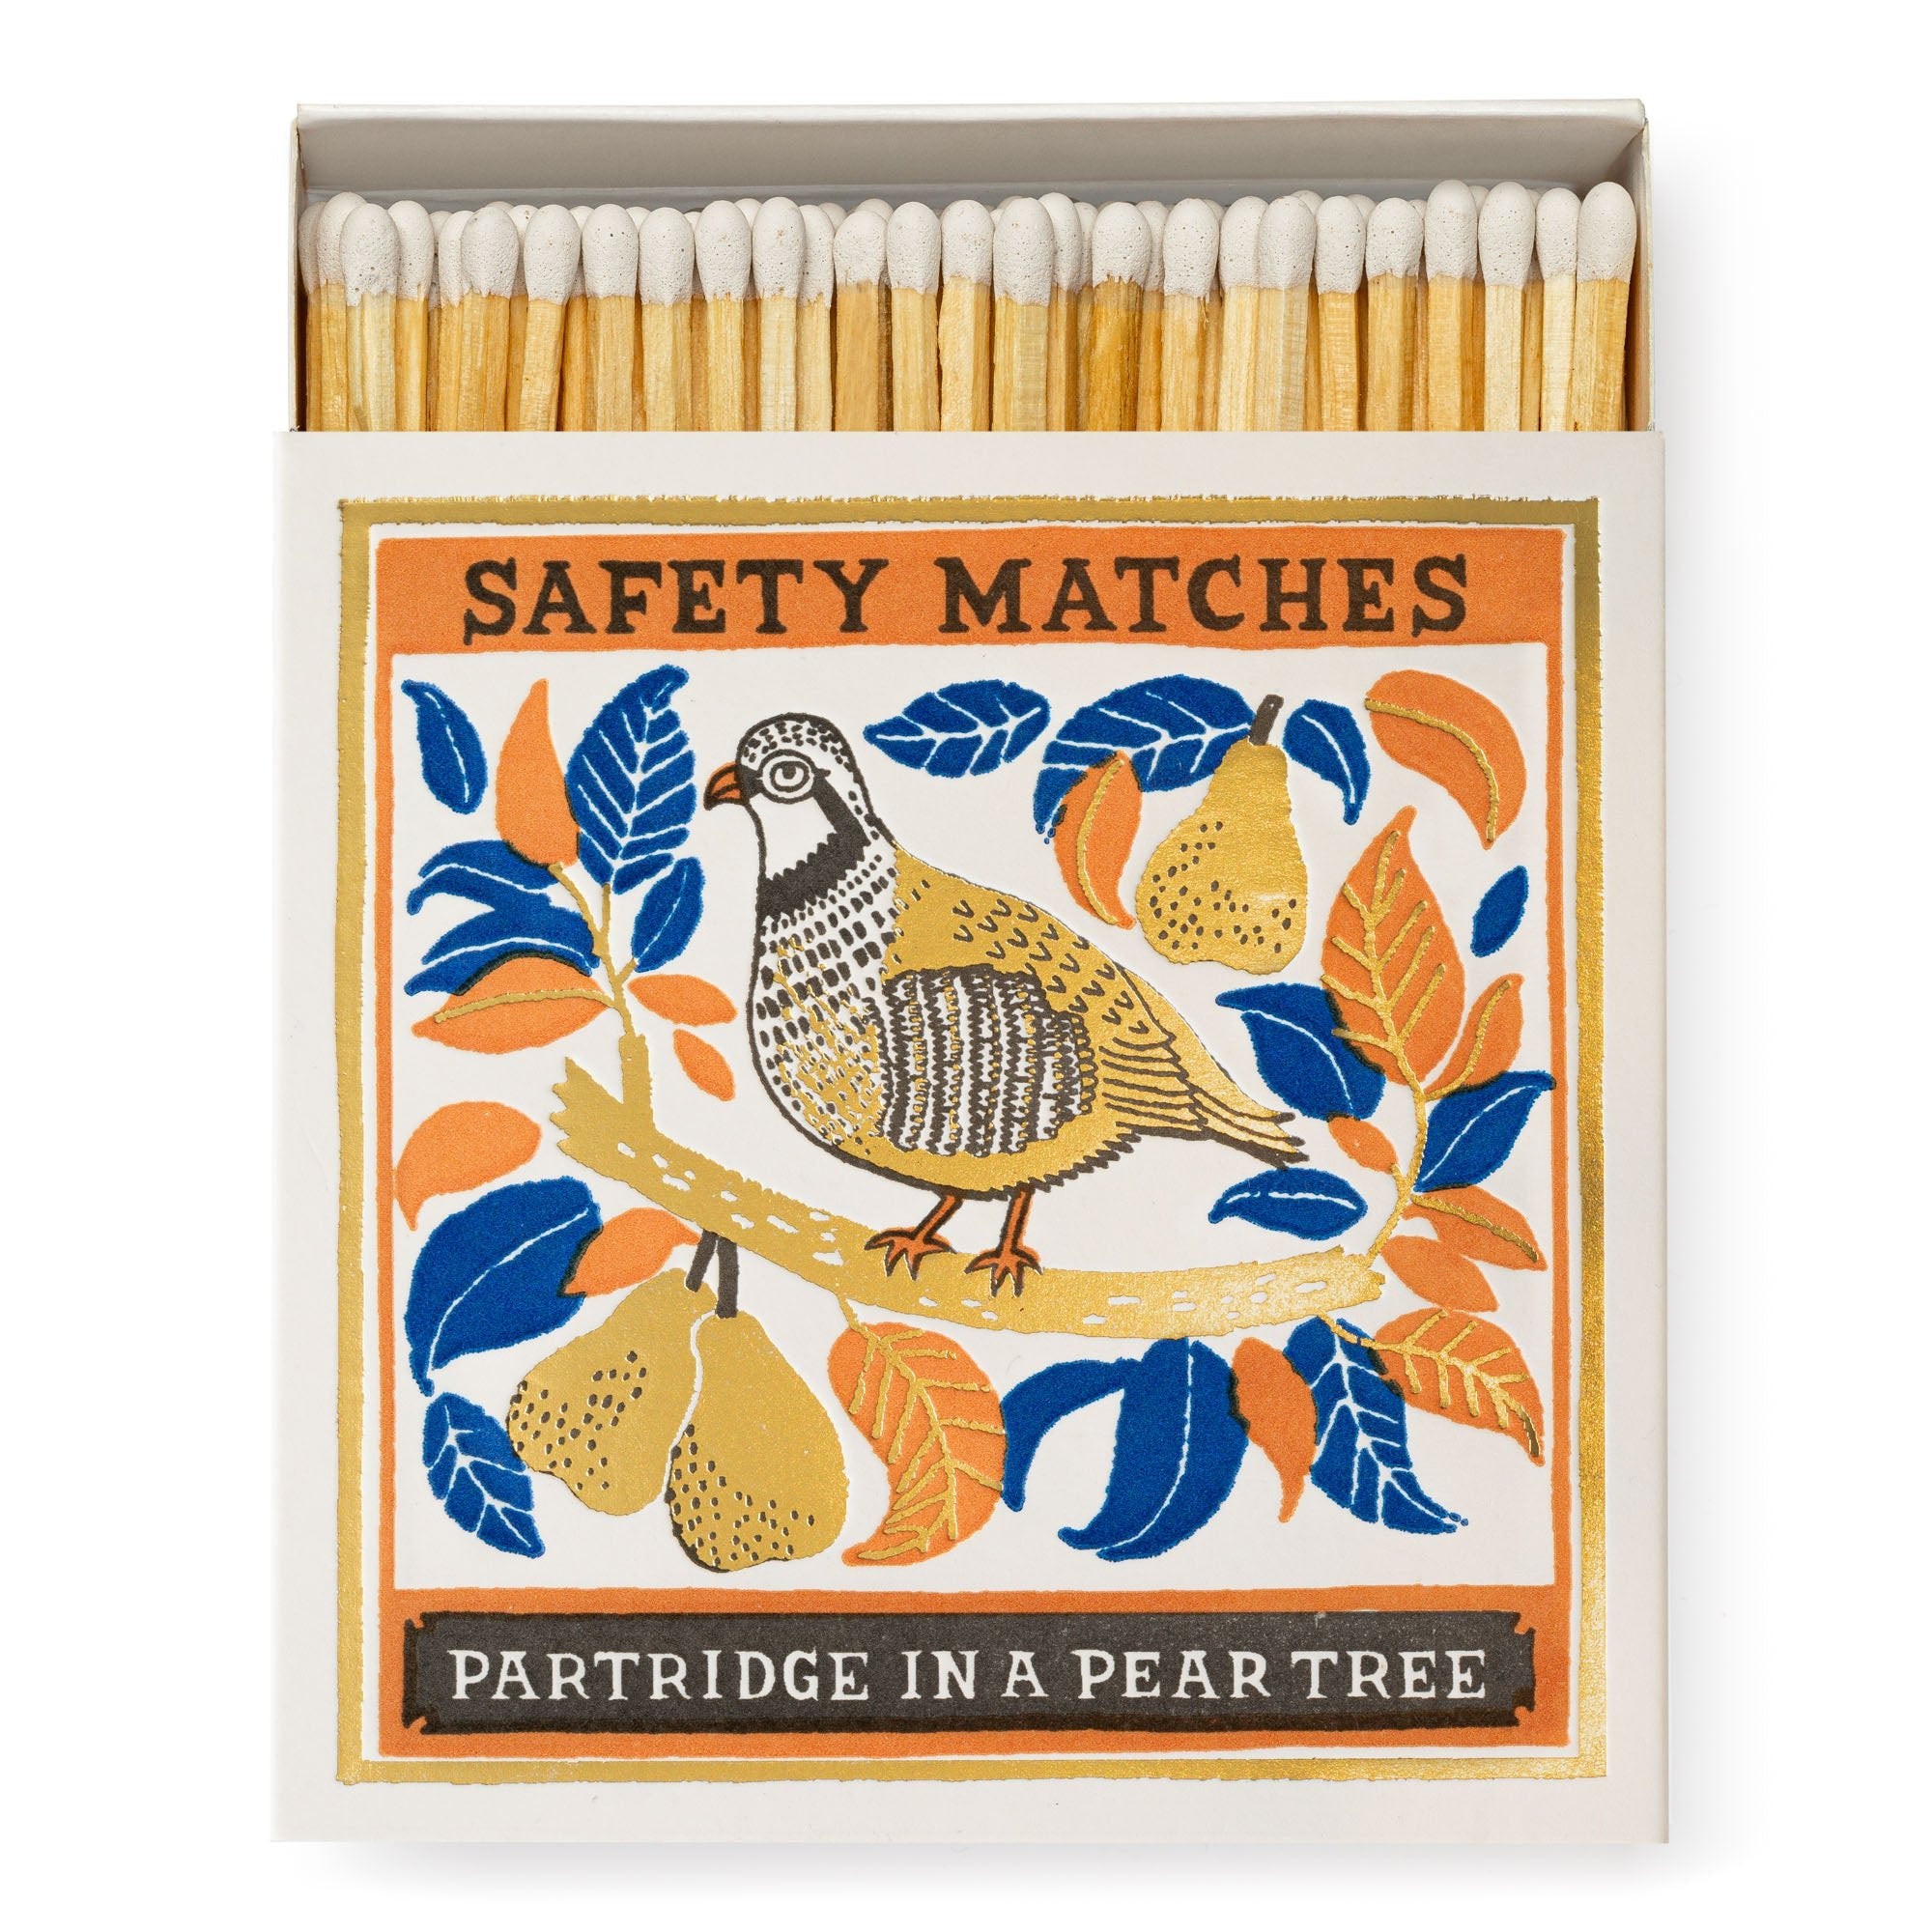 Luxury Matches - Multiple Designs To Choose From - Life of Riley